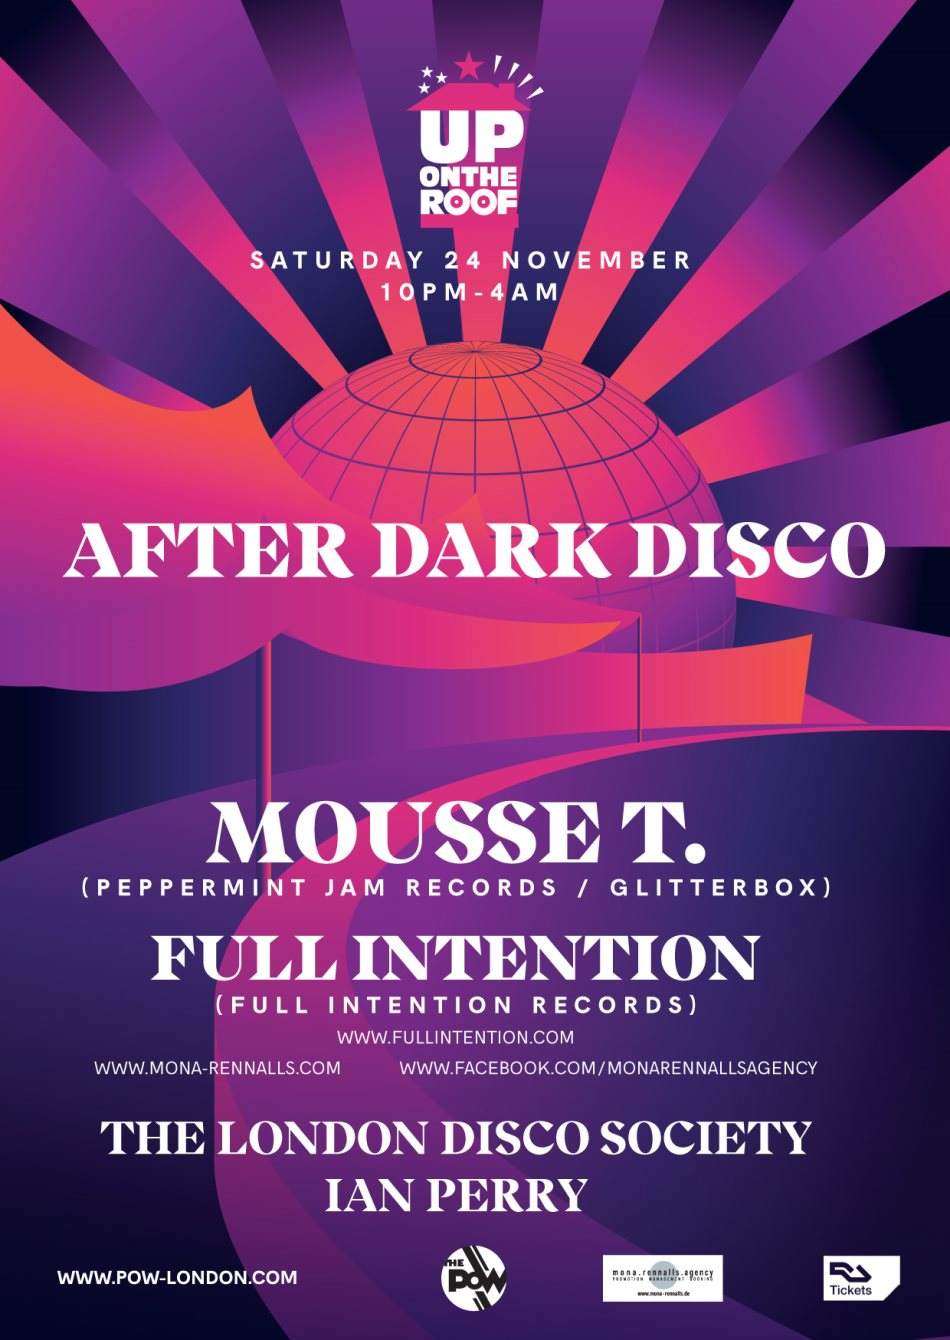 Up On The Roof's After Dark Disco with Mousse T. and Full Intention - フライヤー表